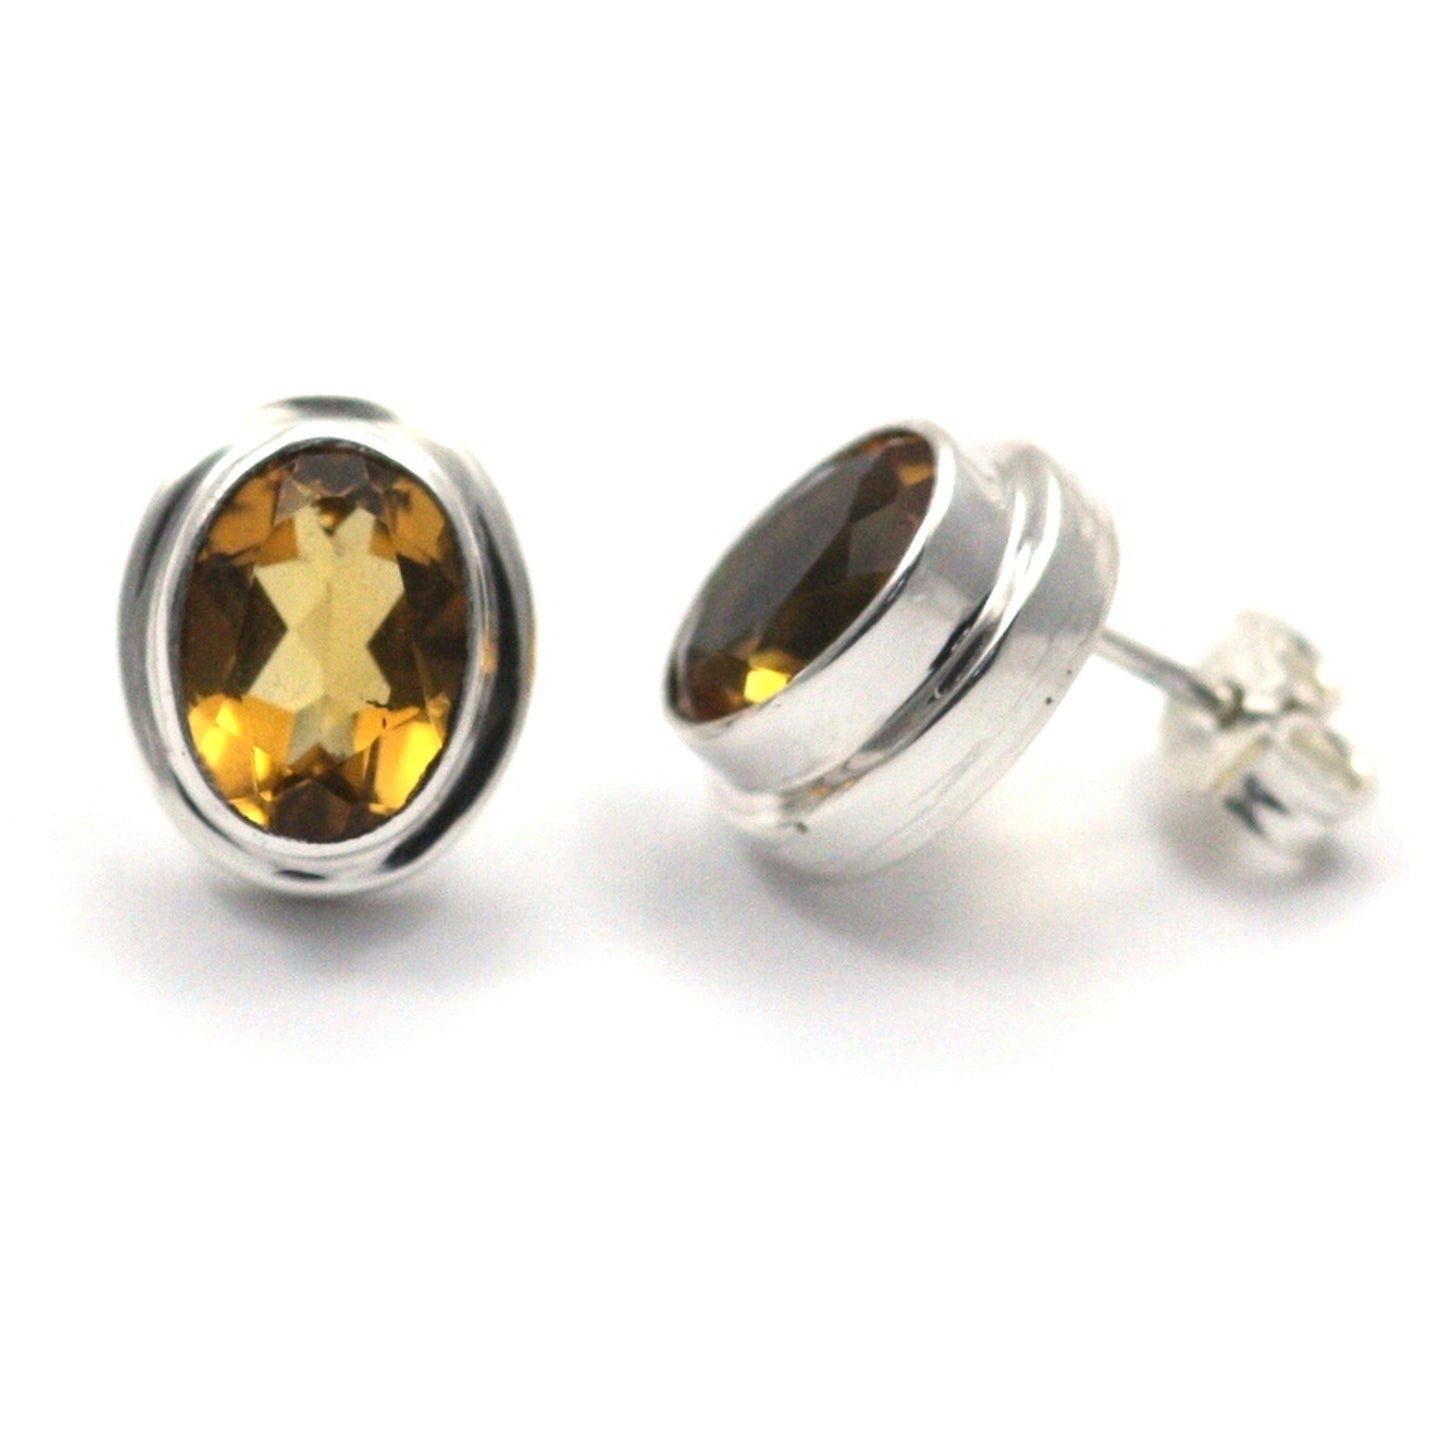 E222CT PADMA .925 Sterling Silver Post Earrings with 6x8mm Genuine Citrine Gemstones